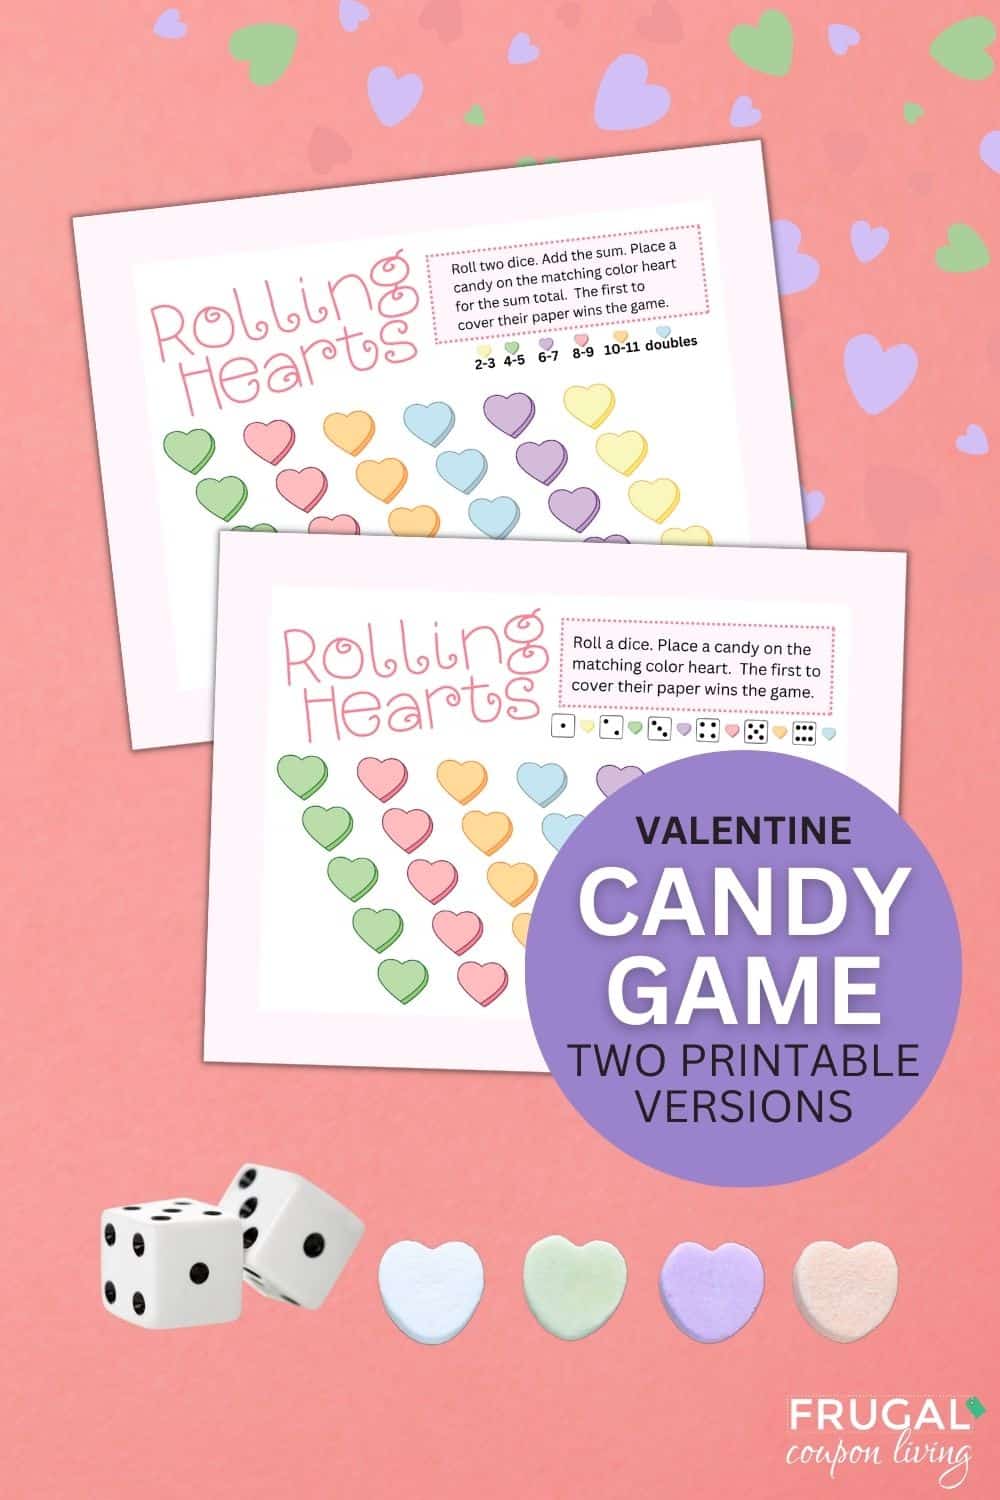 printable conversation heart game with dice